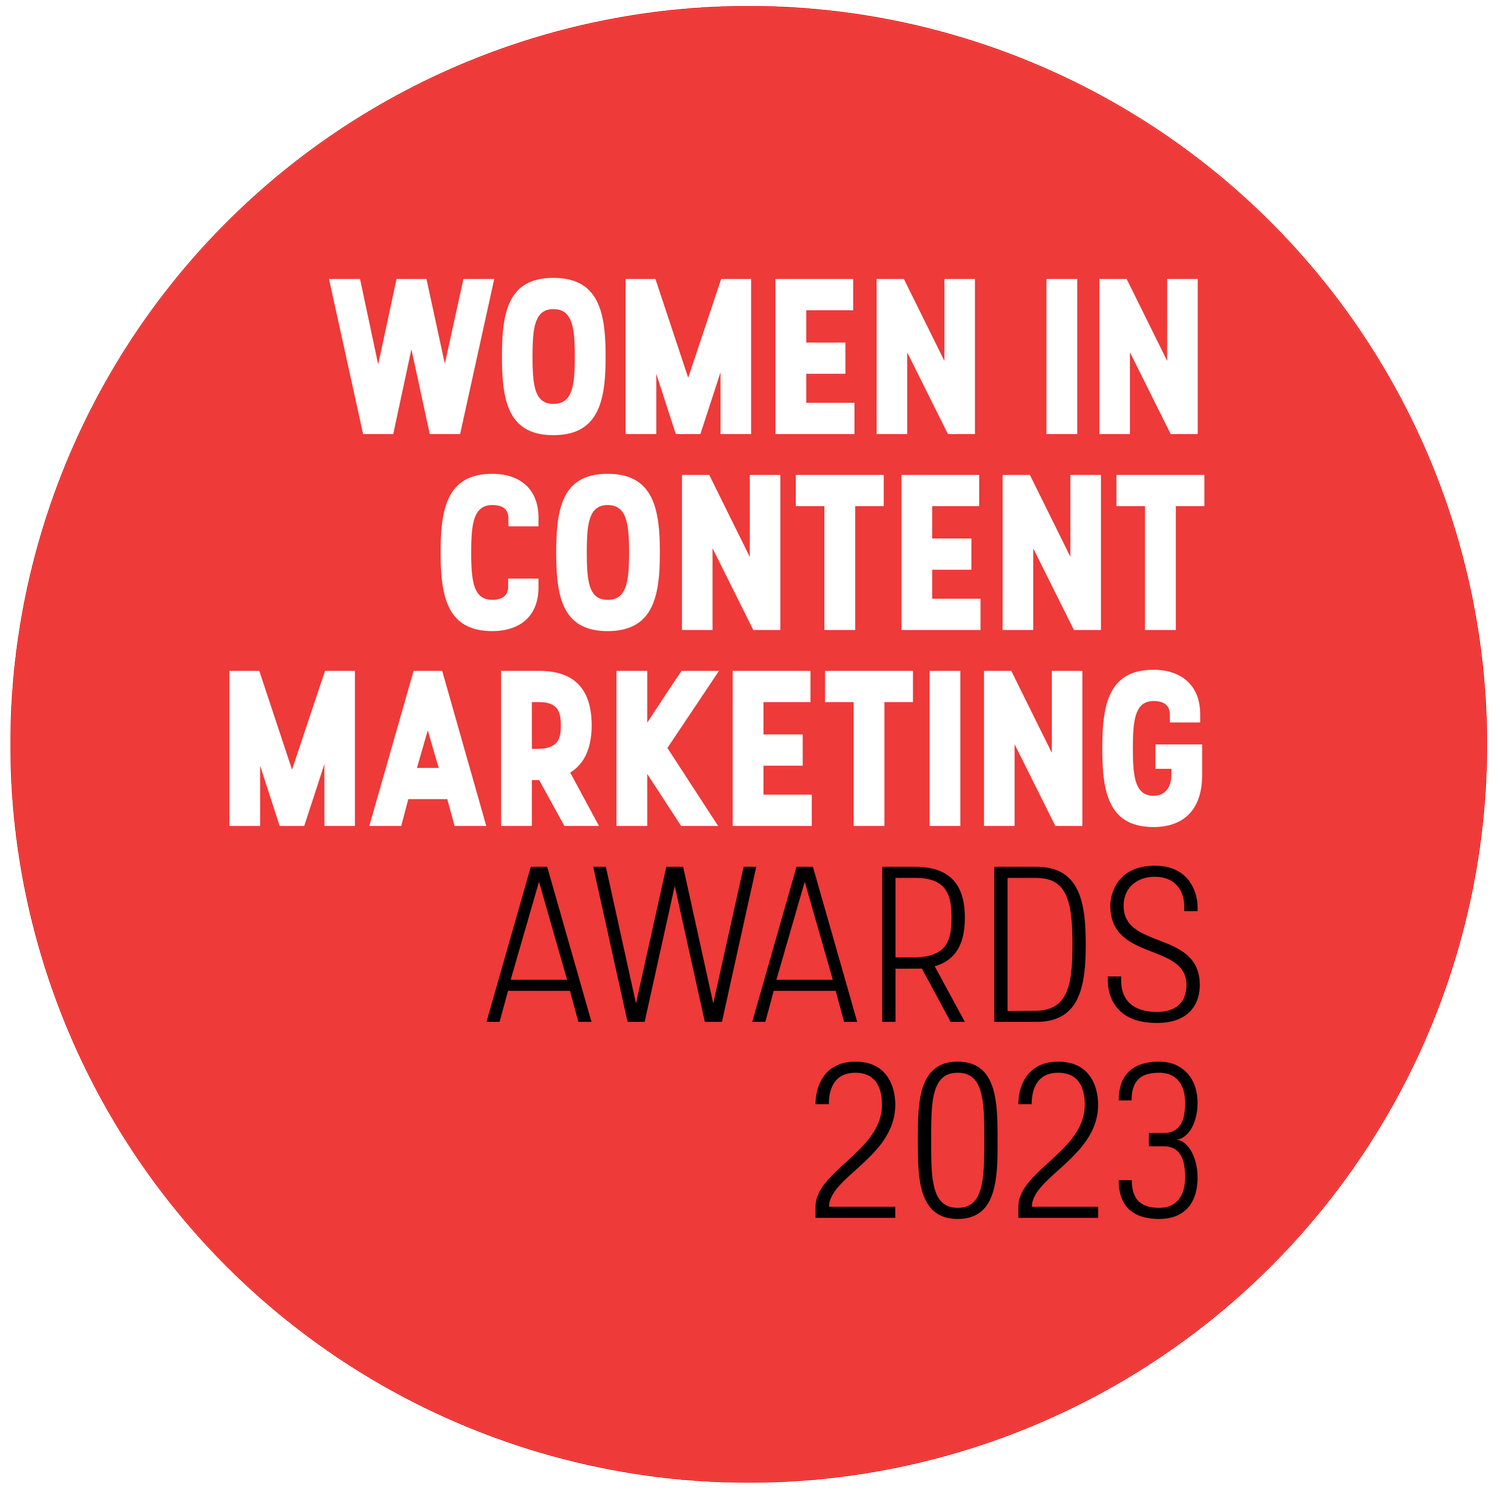 Women in Content Marketing Awards